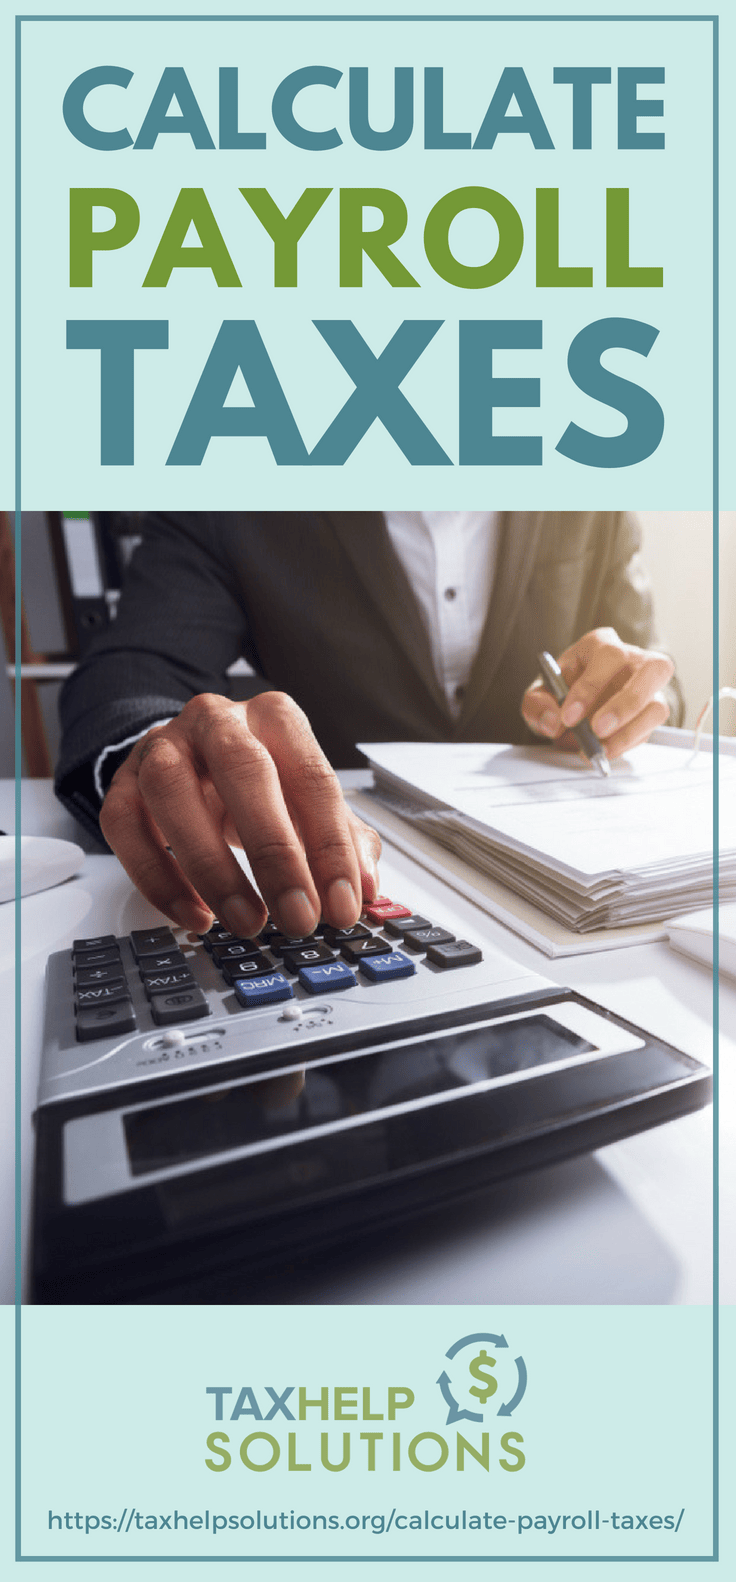 Pinterest Placard | Key Points To Remember When You Calculate Payroll Taxes https://help.taxreliefcenter.org/calculate-payroll-taxes/